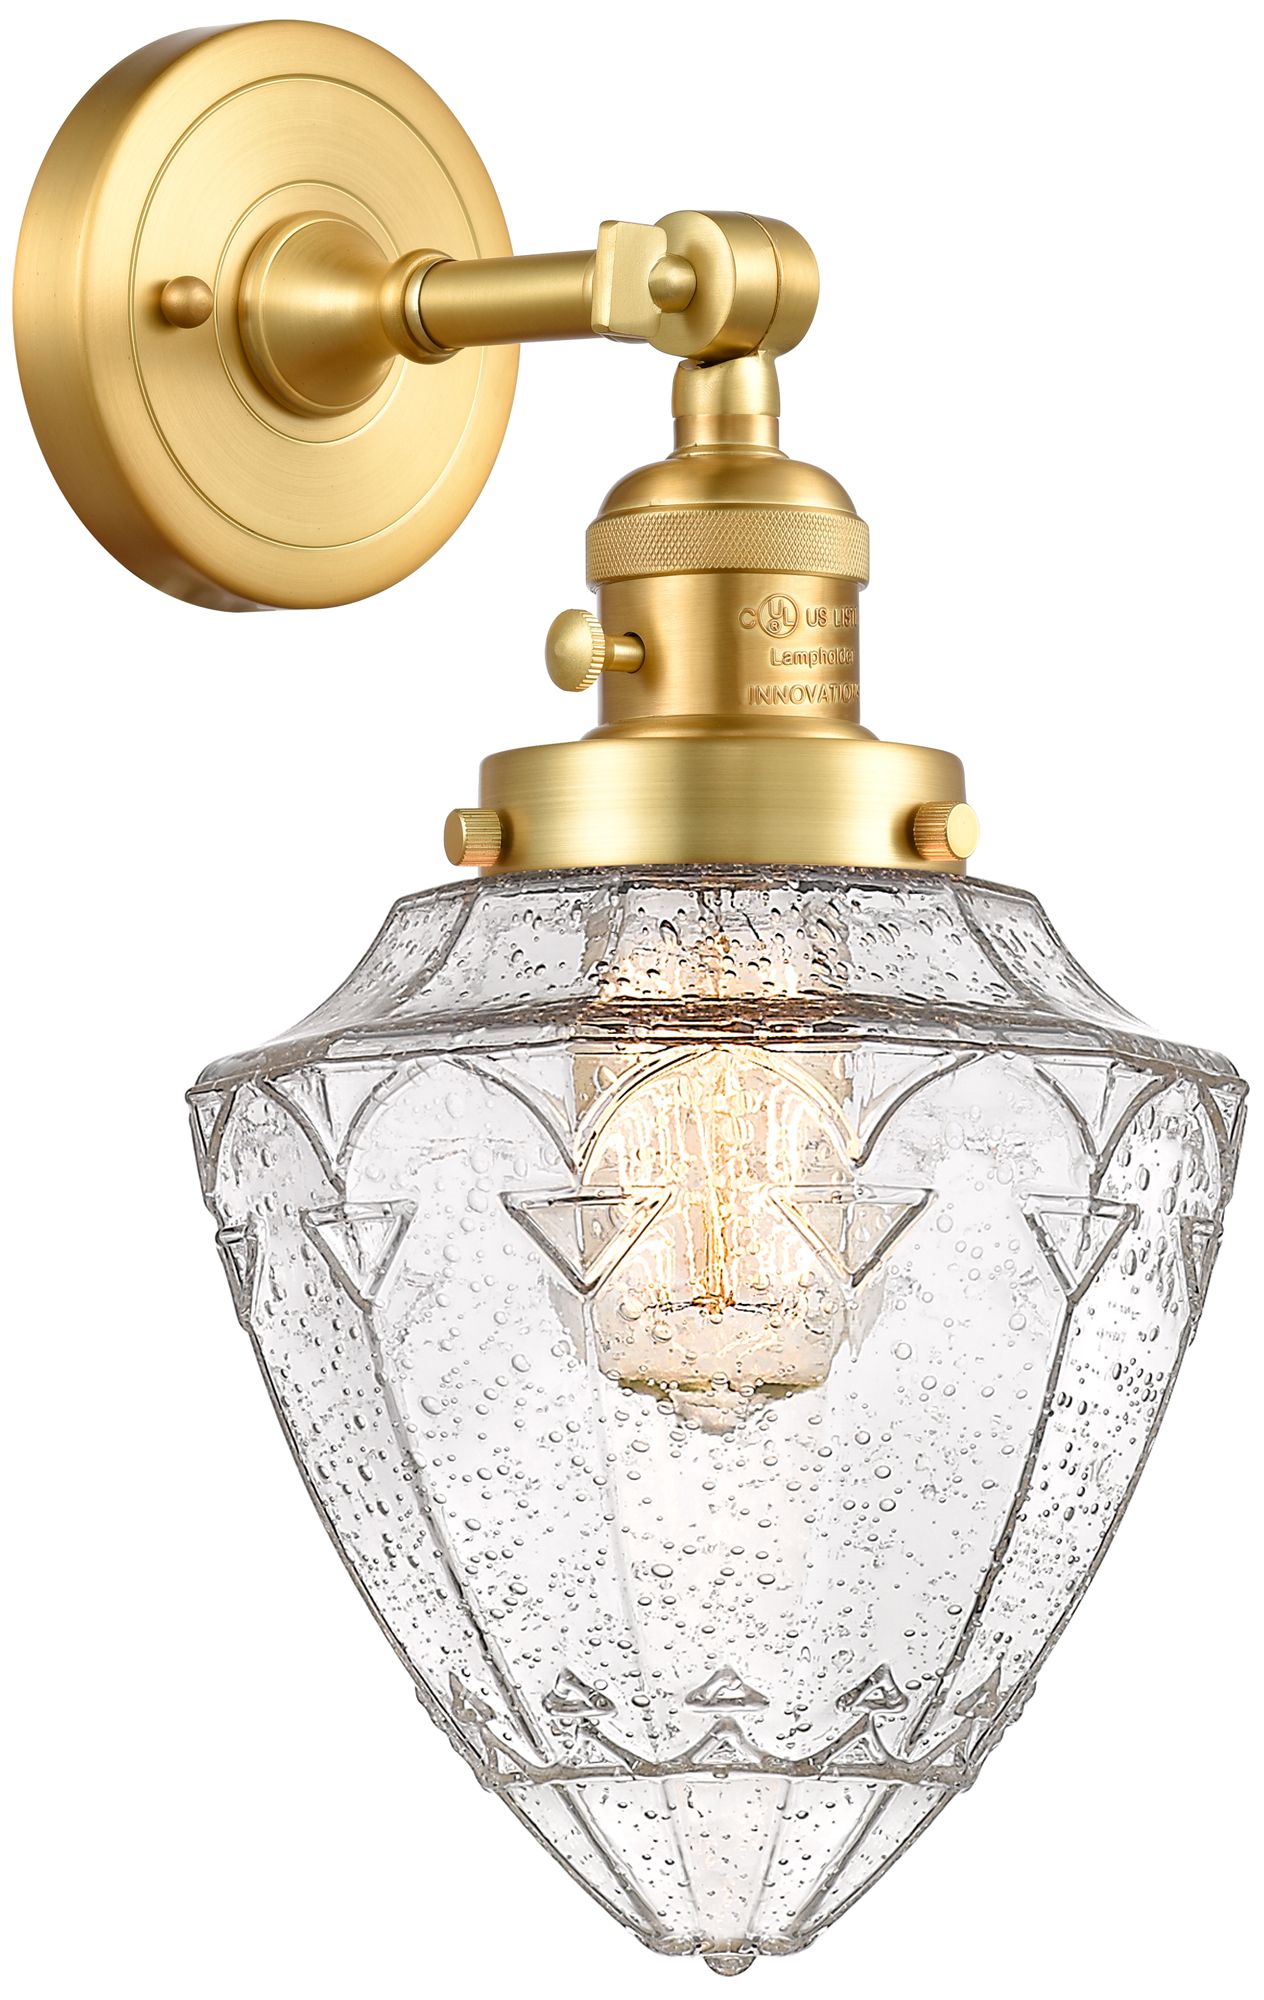 Bullet 7" Satin Gold Sconce w/ Seedy Shade